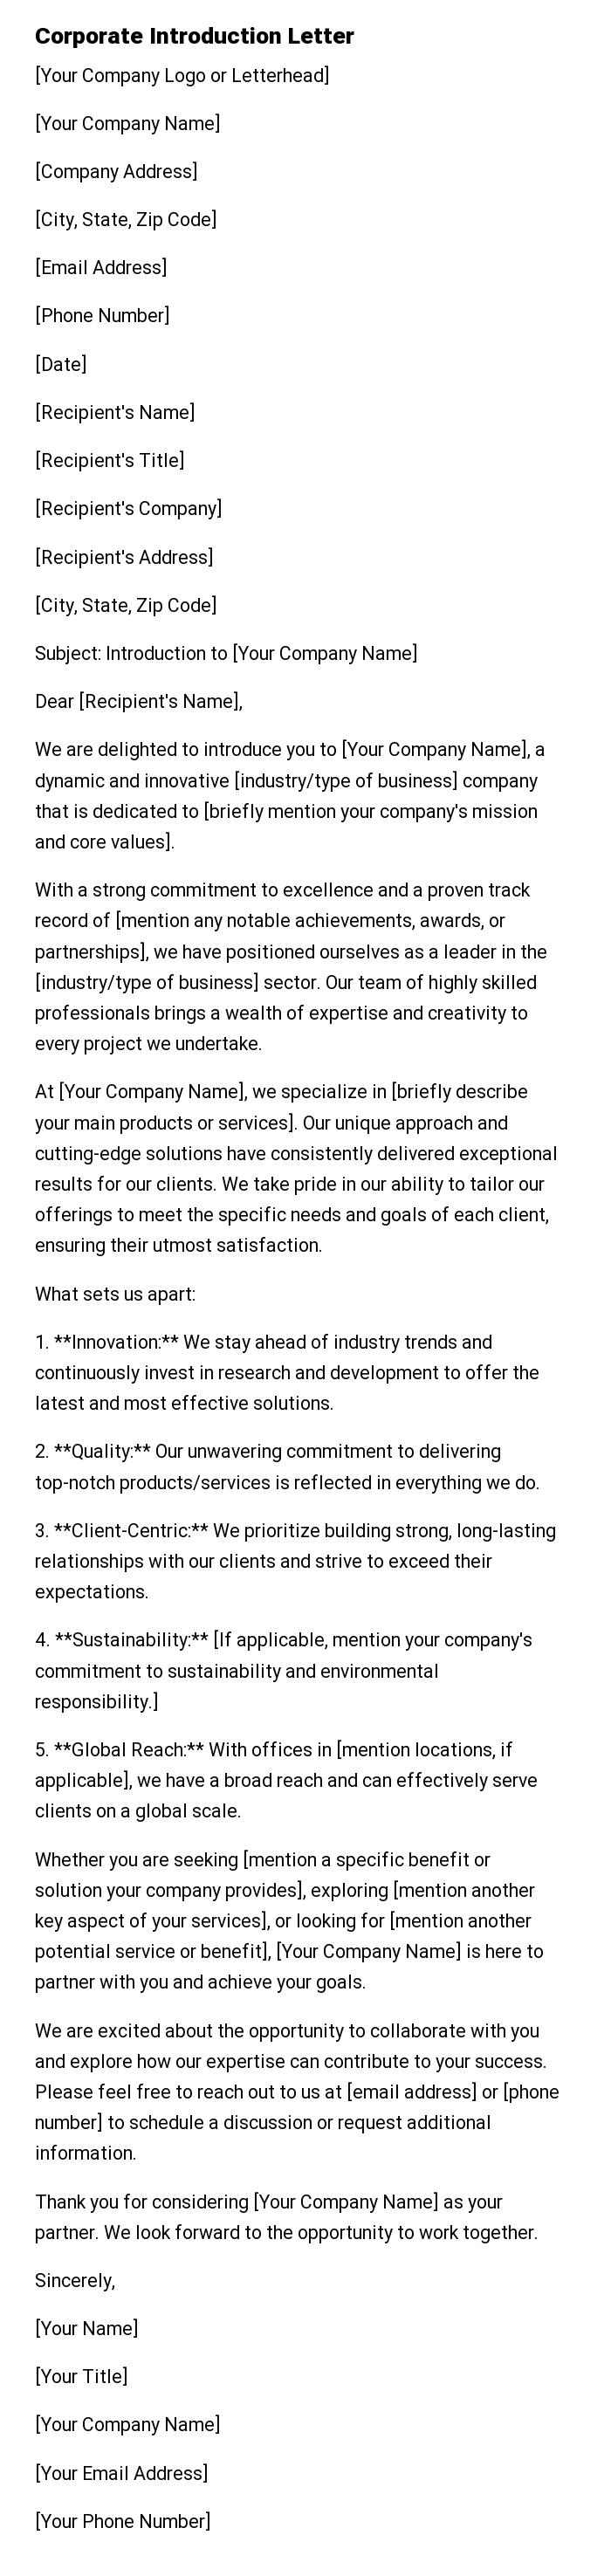 Corporate Introduction Letter